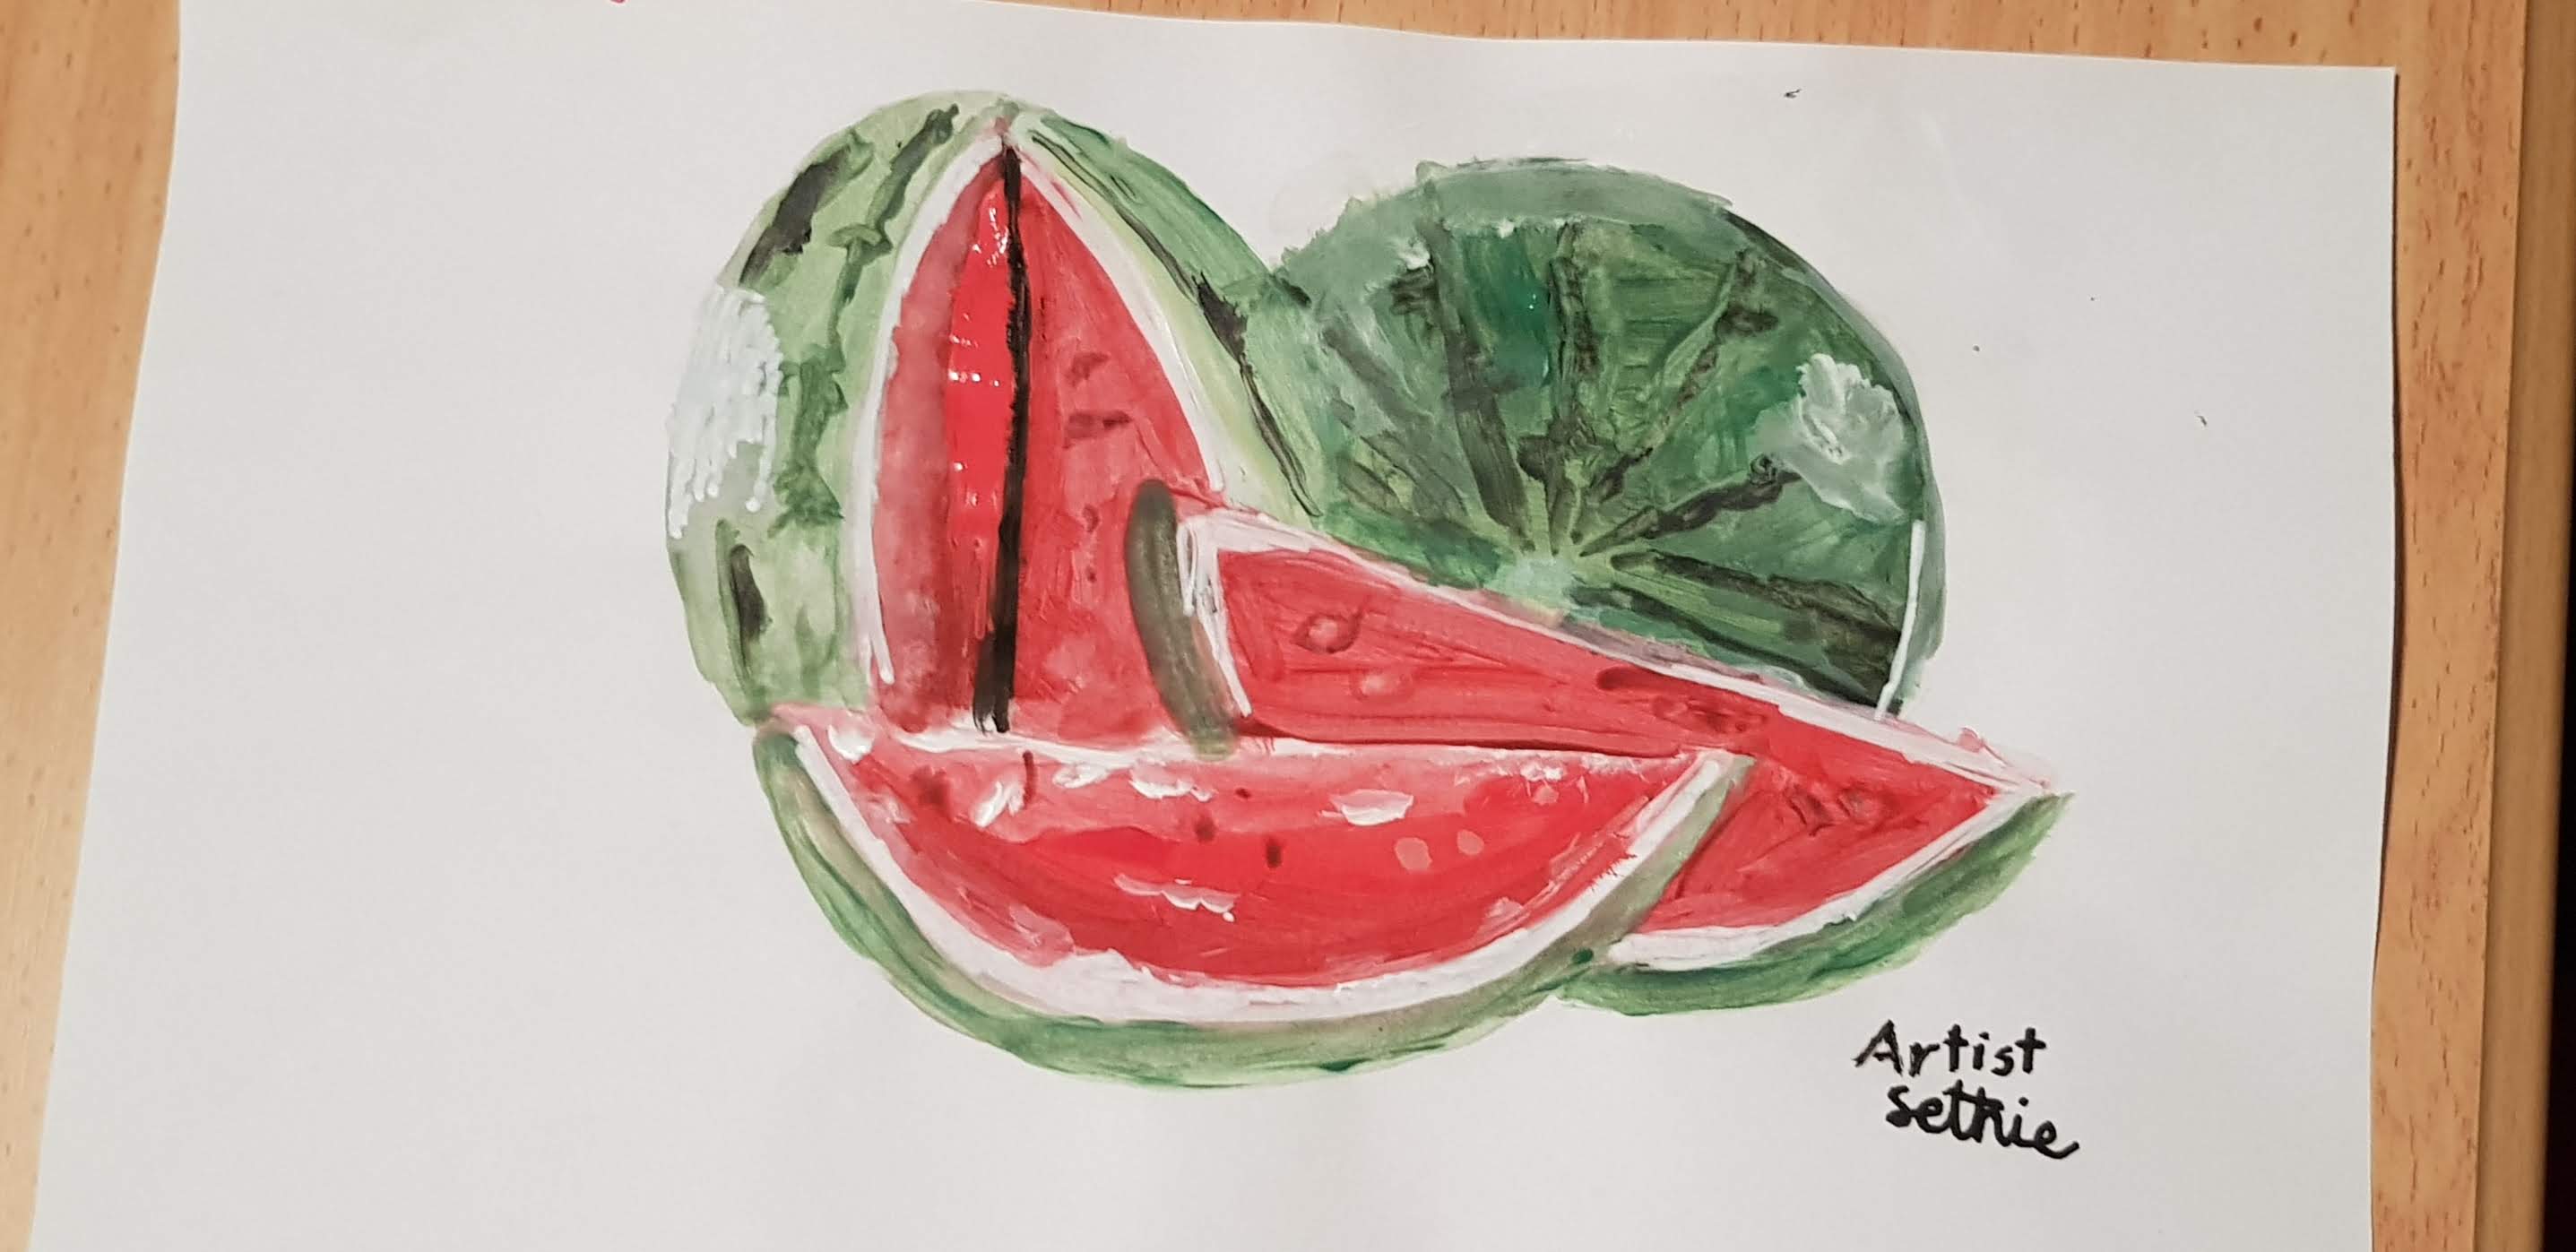 A Drawing of a Whole, and cut watermelon